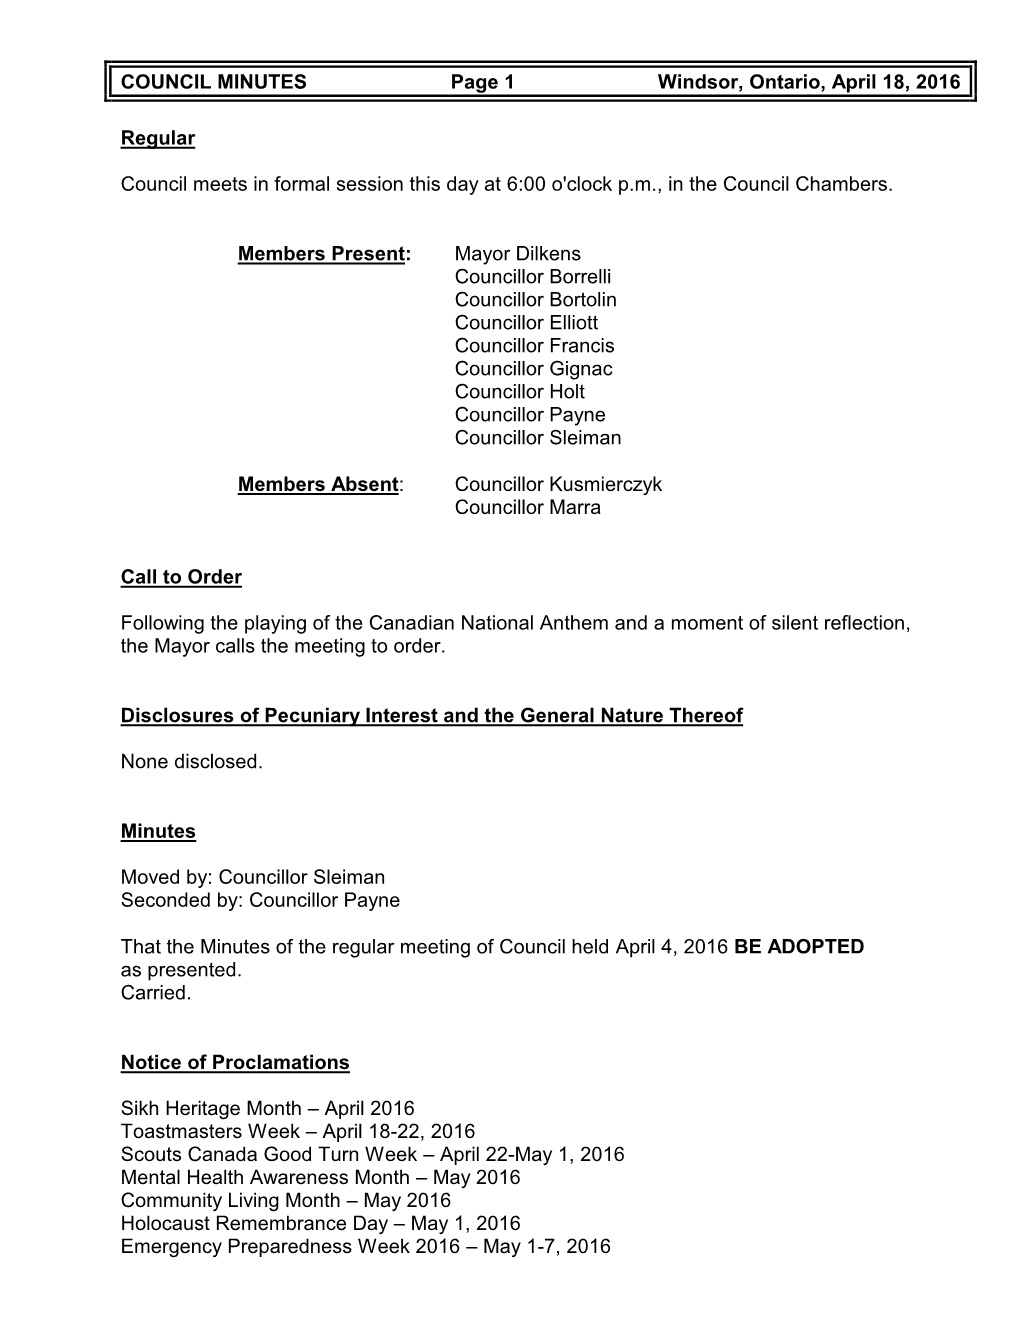 COUNCIL MINUTES Page 1 Windsor, Ontario, April 18, 2016